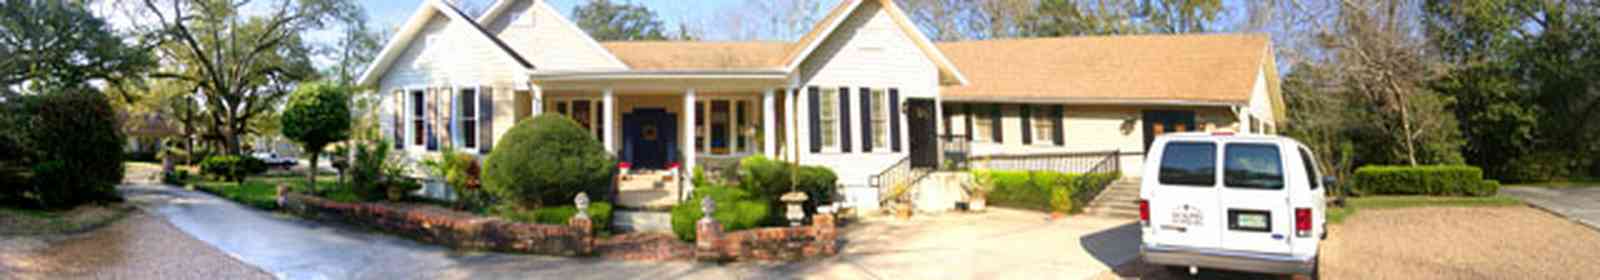 East-Hill:-McAlpin-Shop_03.jpg:  antique shop, colonial style house, dormers, shutters, clapboard cottage, 